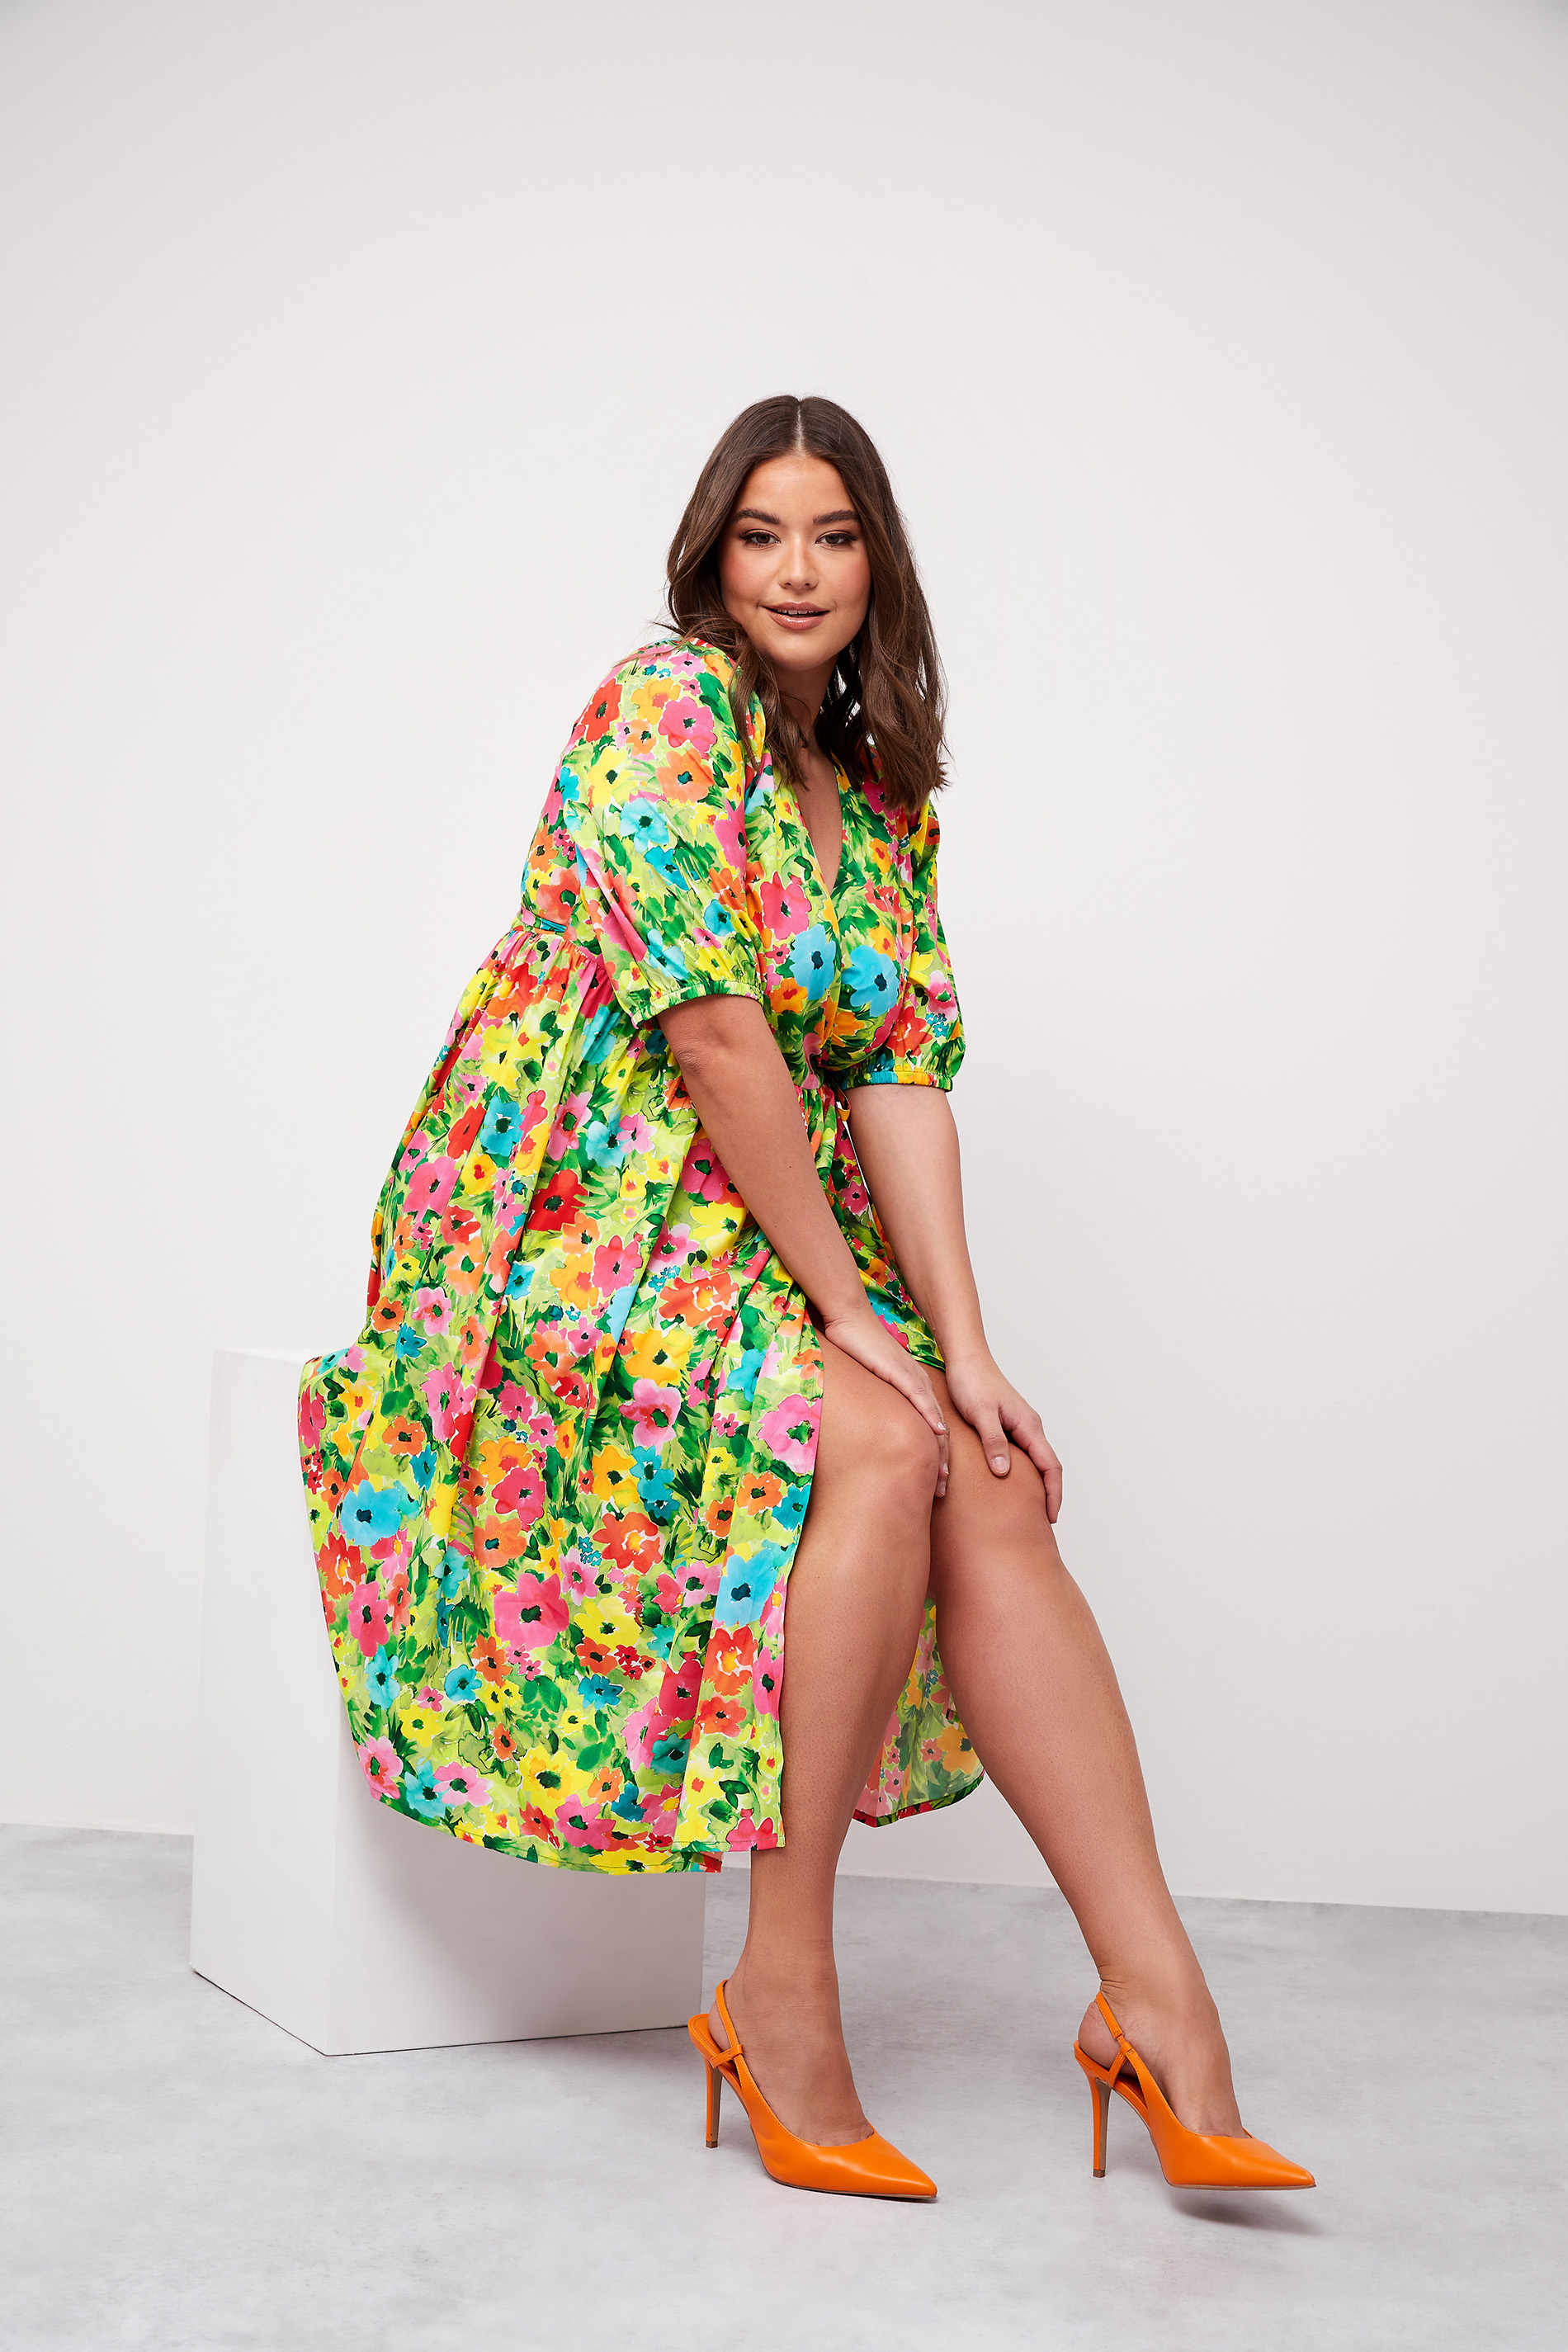 Green Floral Dress: a plus size summer outfit featuring a green